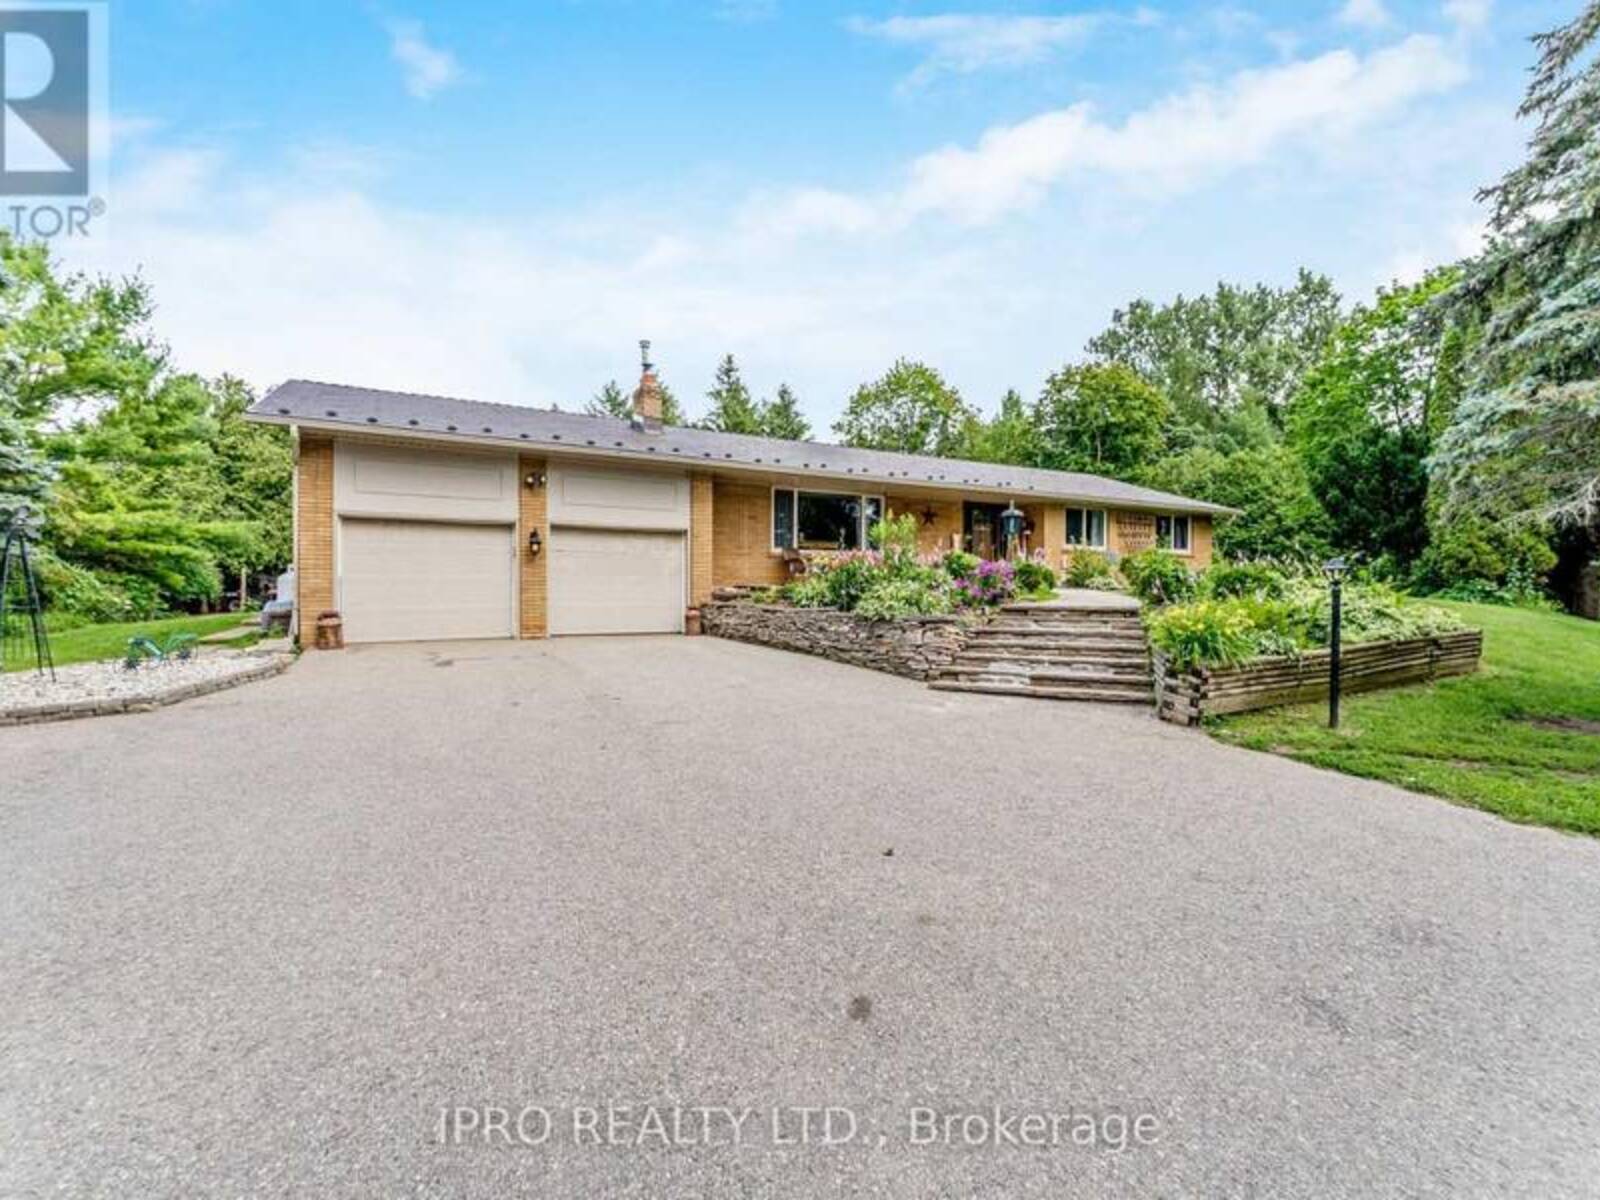 19997 WILLOUGHBY RD, Caledon, Ontario L7K 1W1